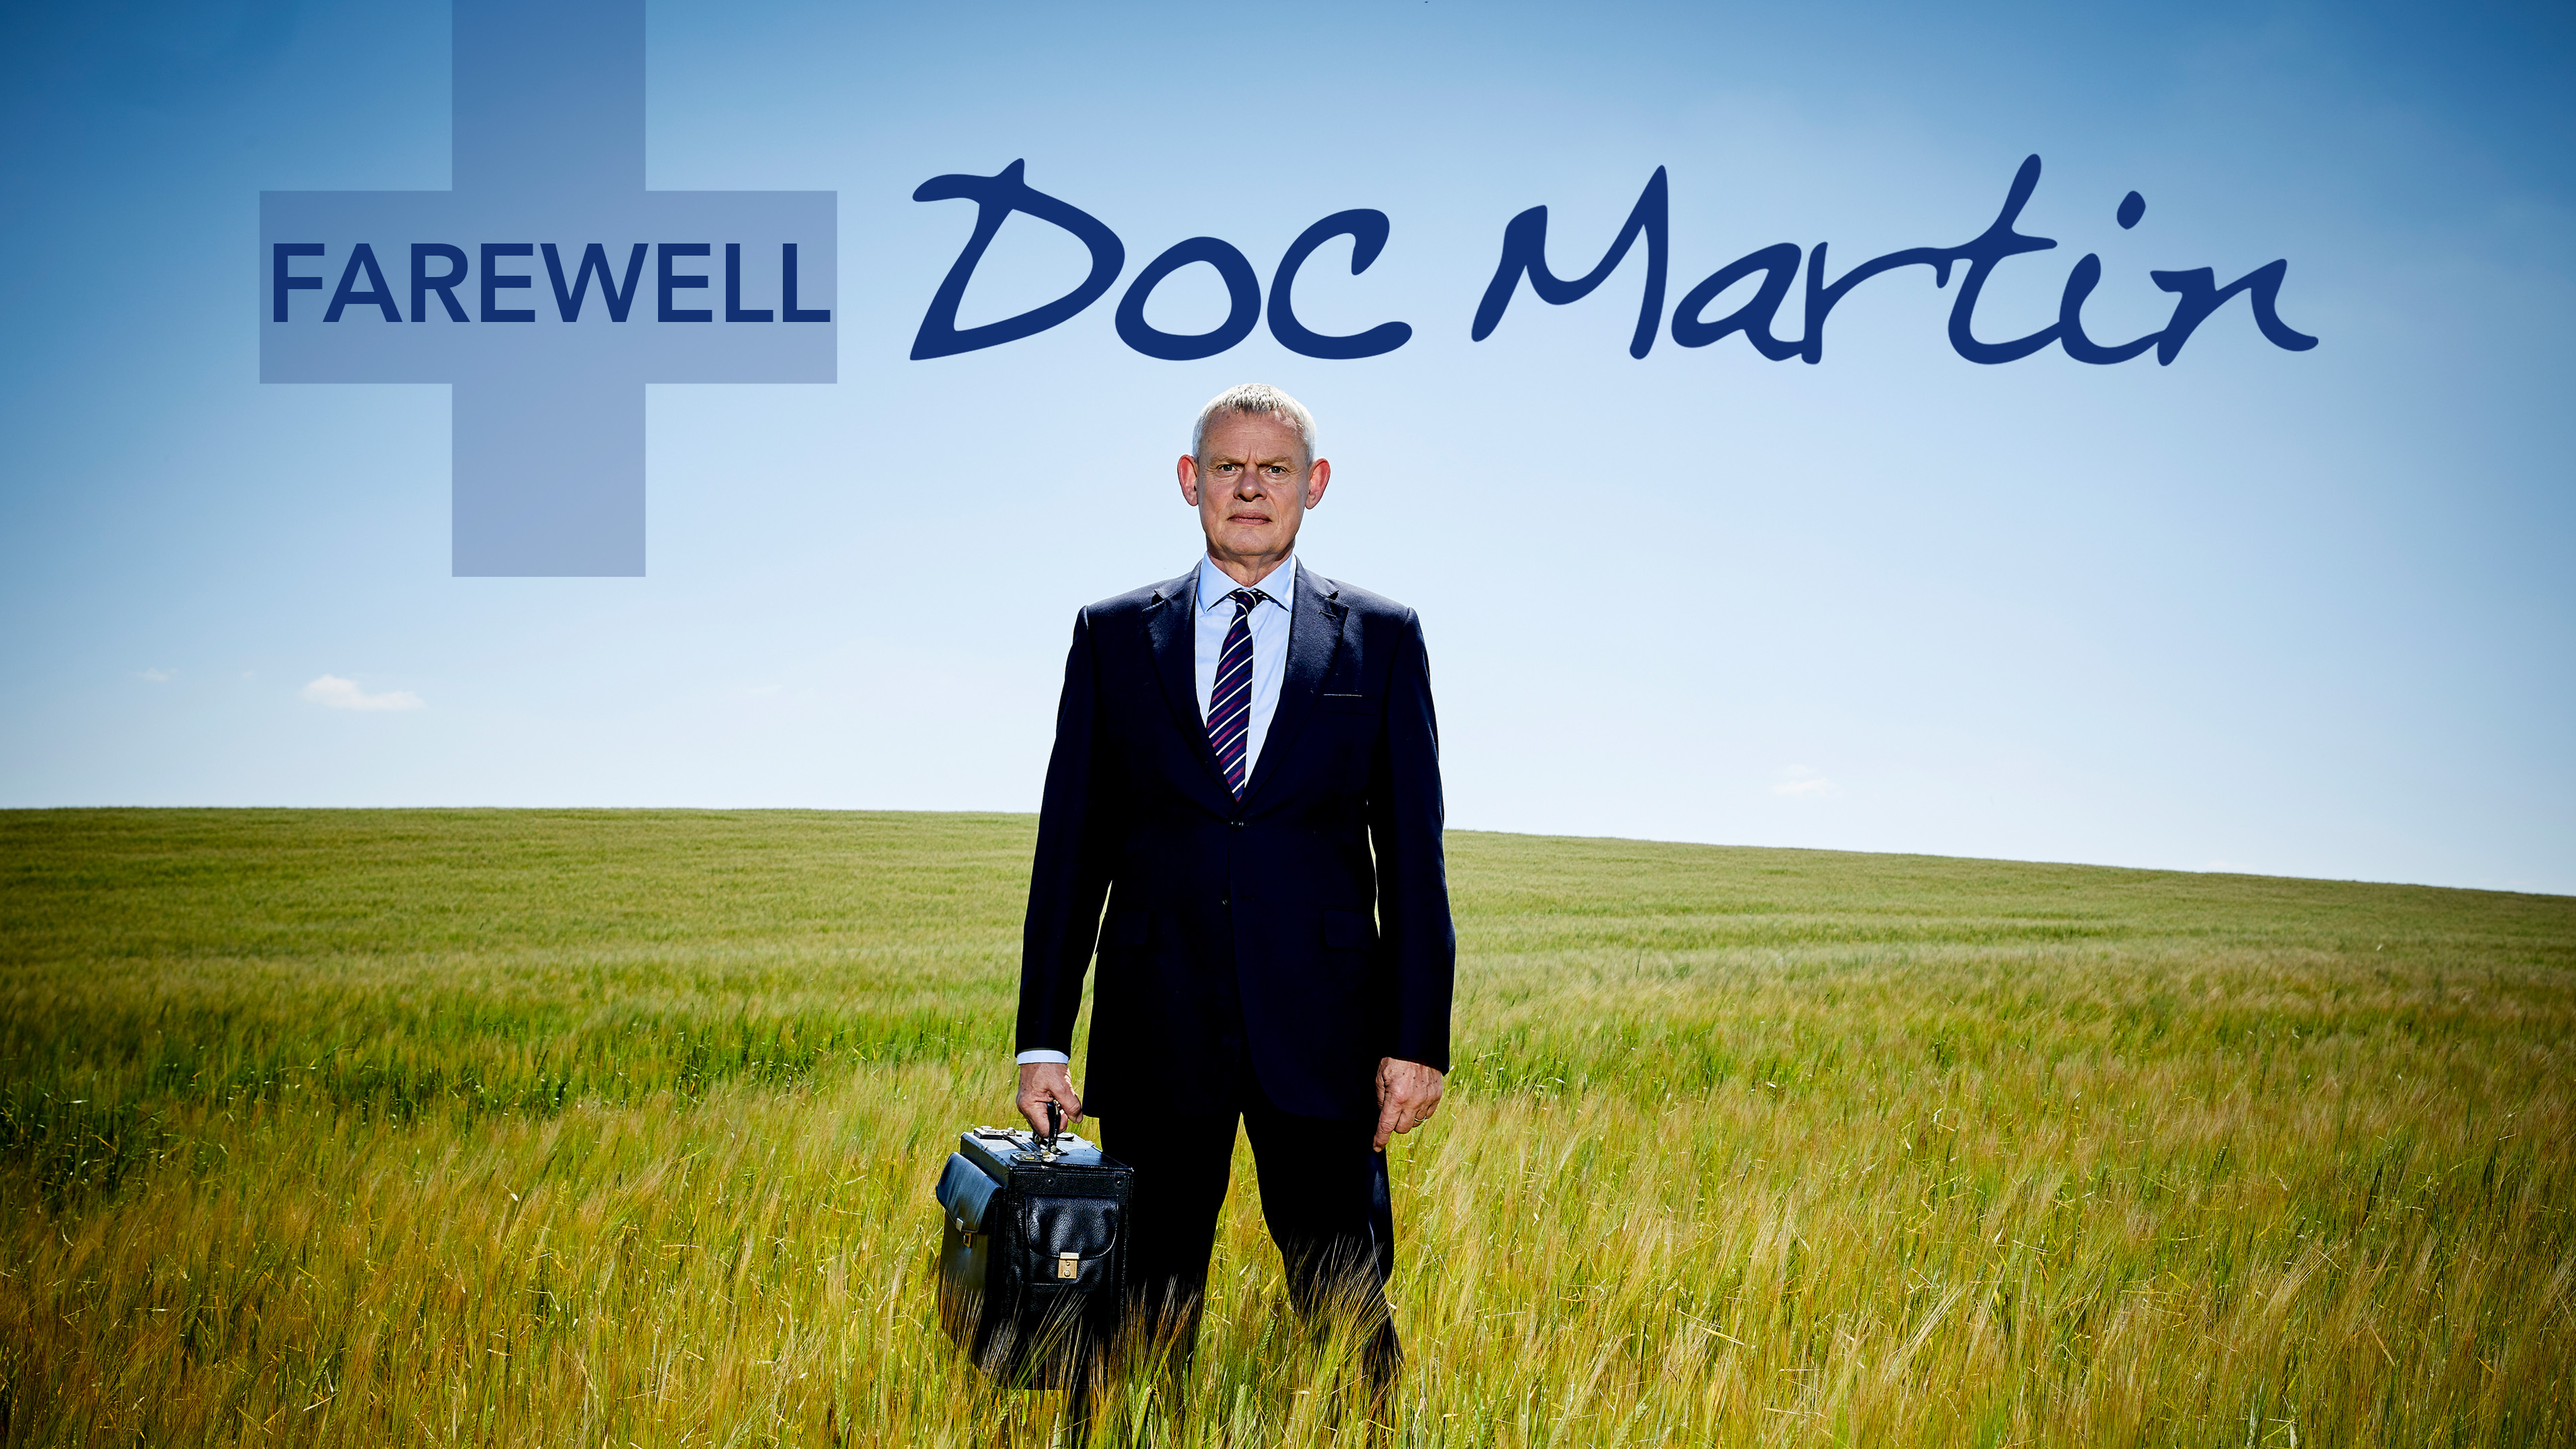 A bittersweet send-off, celebrating 10 seasons of DOC MARTIN. Watch the promo here.